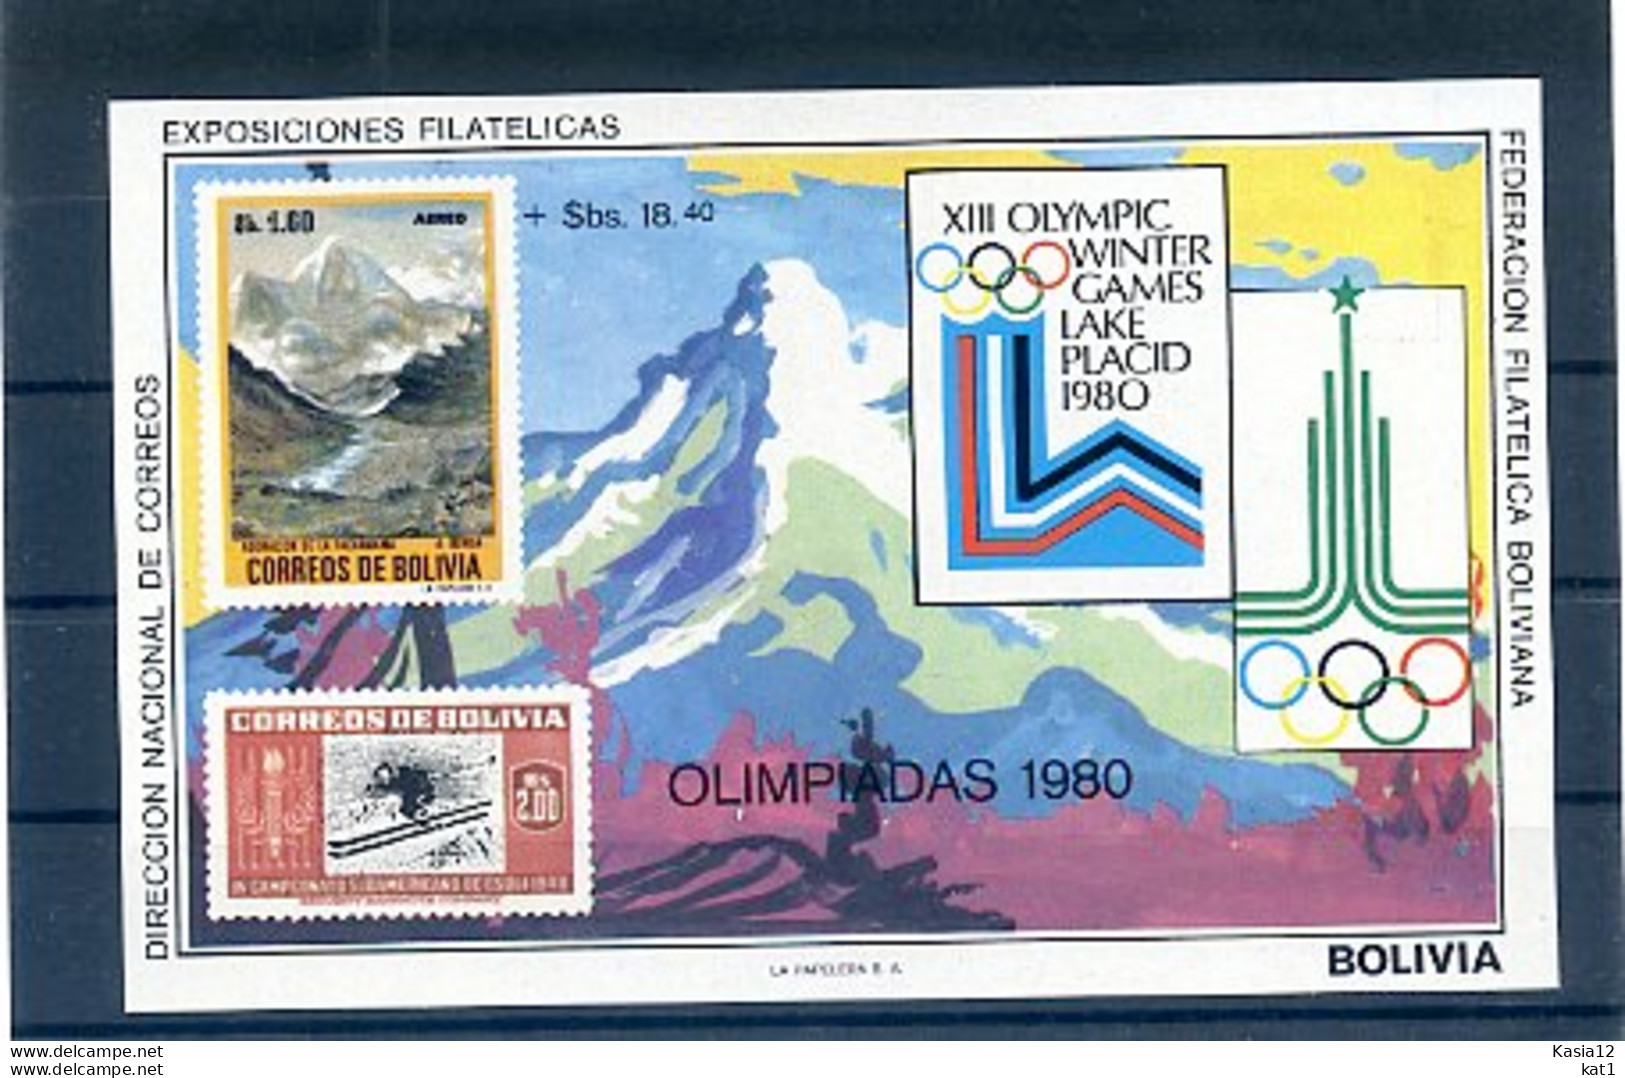 A20405)Olympia 80: Bolivien Bl 89** - Winter 1980: Lake Placid